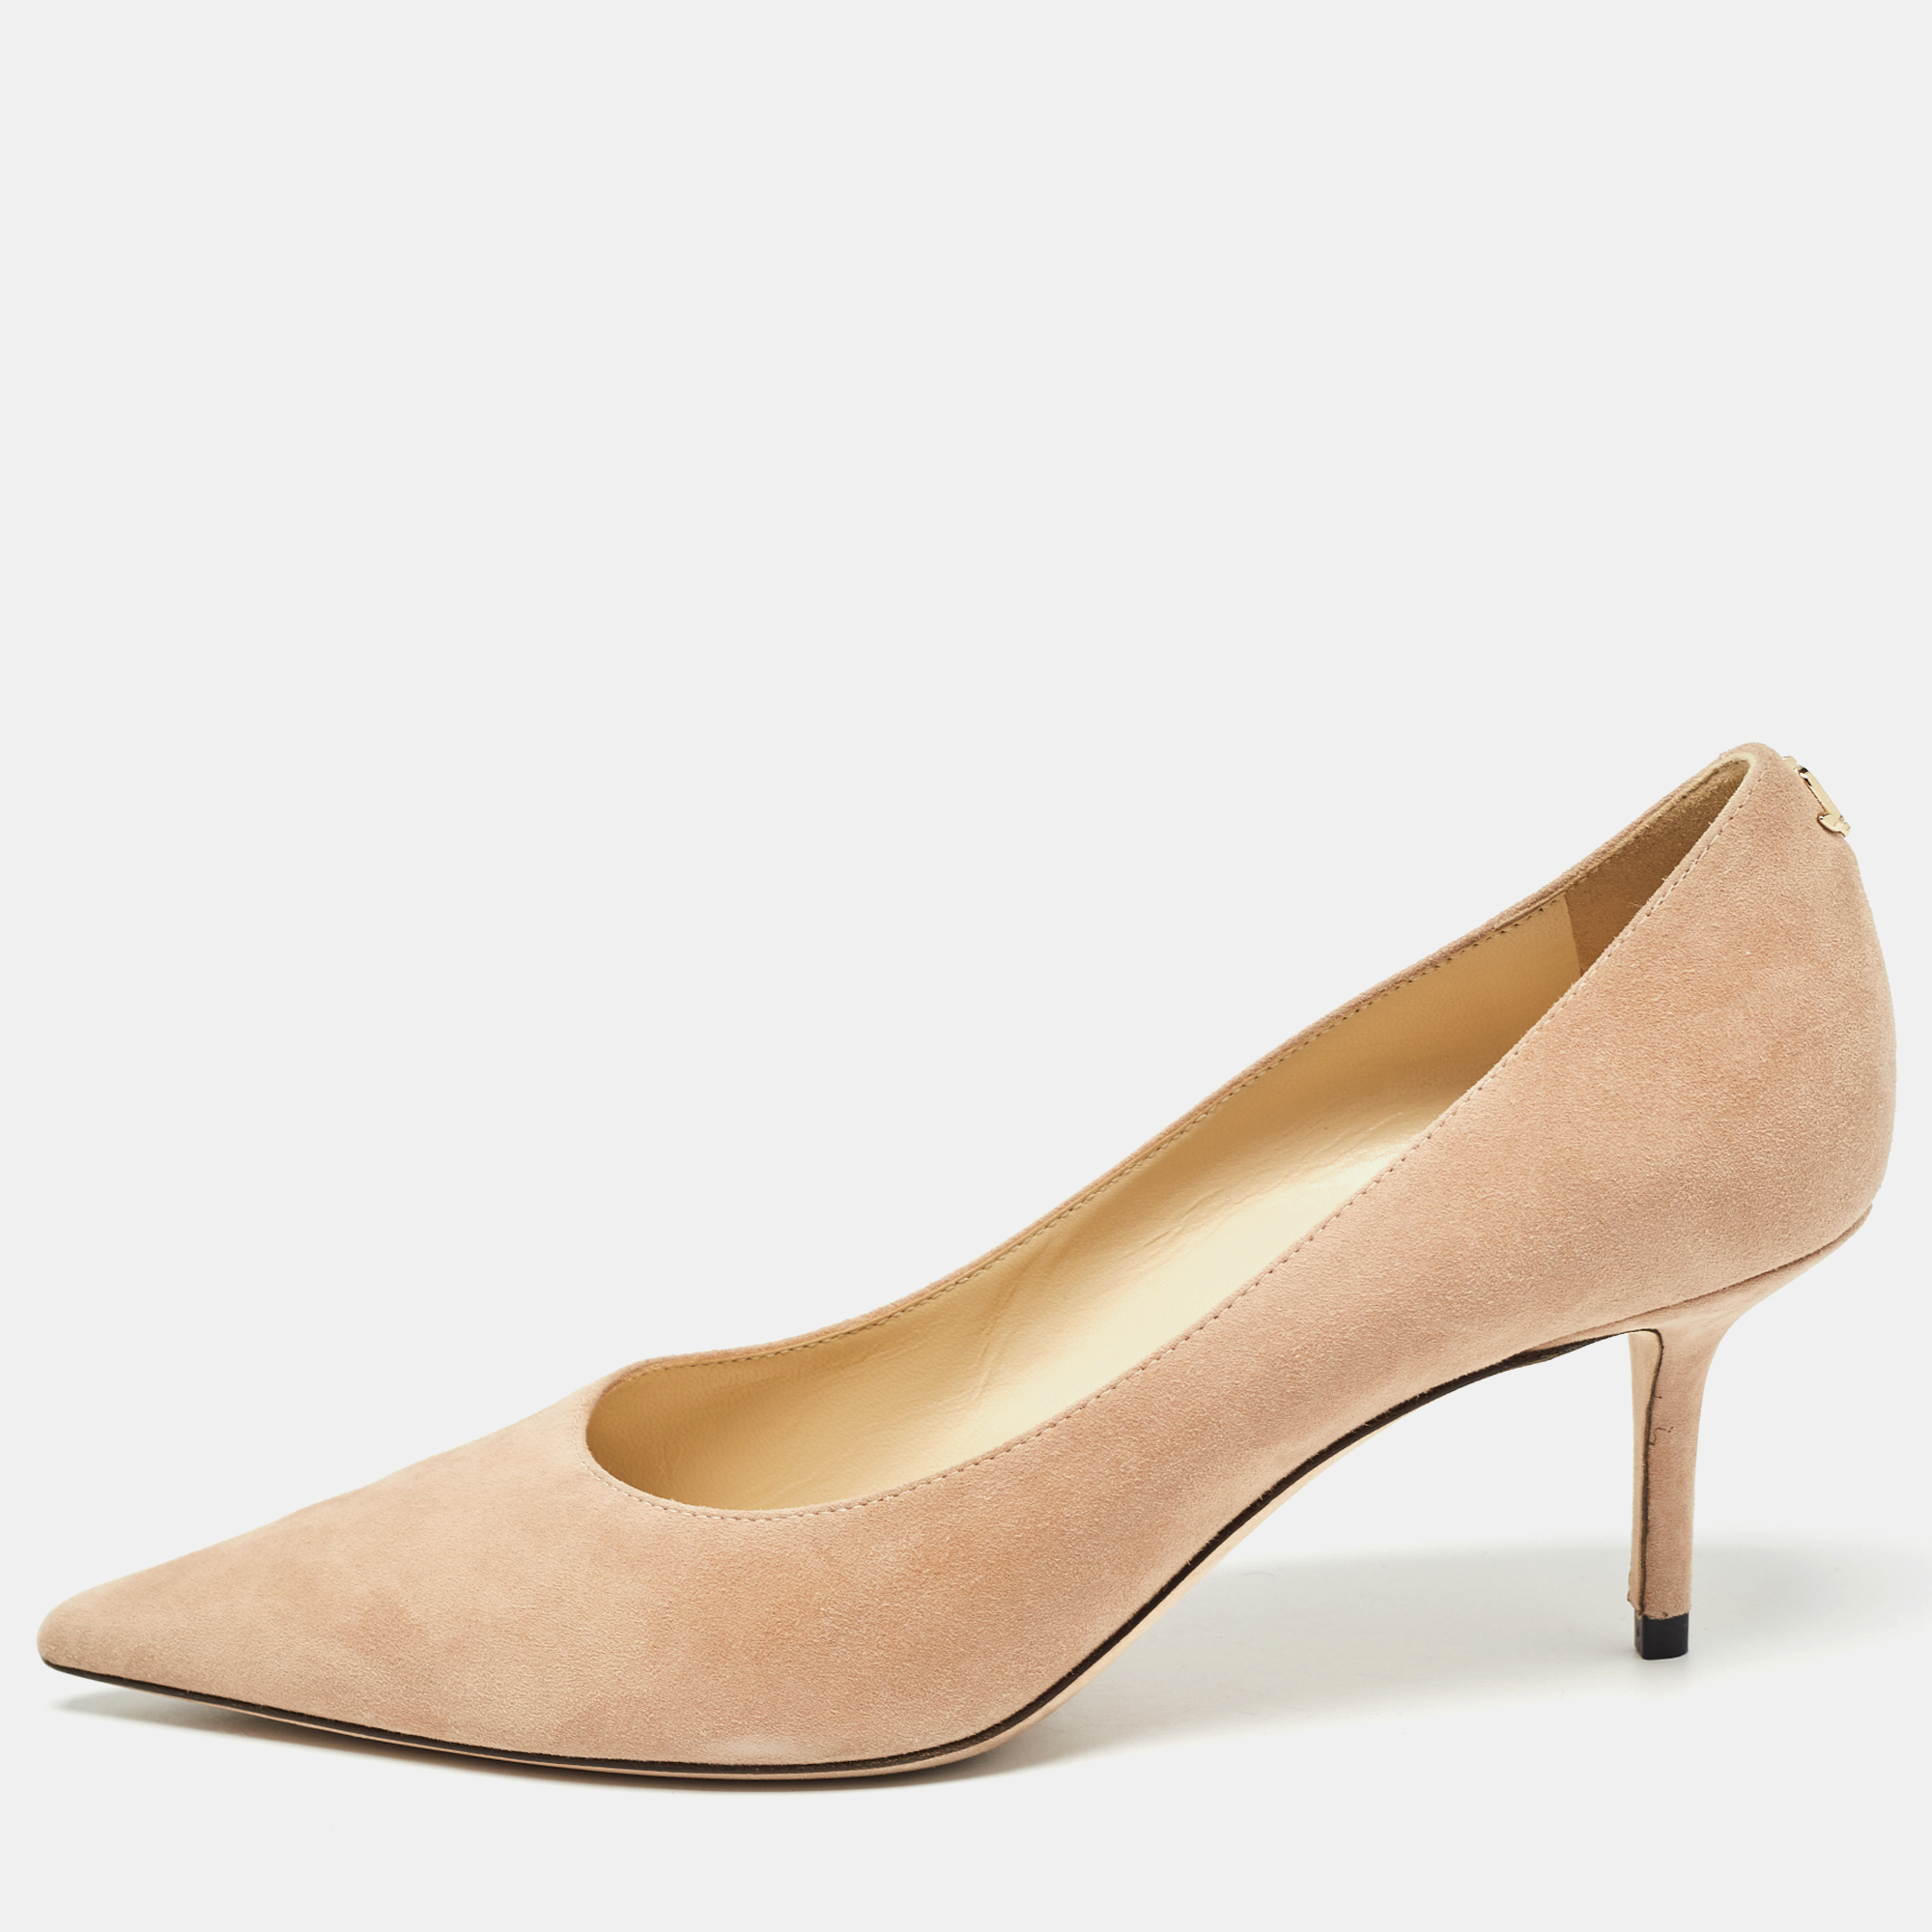 Pre-owned Jimmy Choo Light Pink Suede Love Pumps Size 38